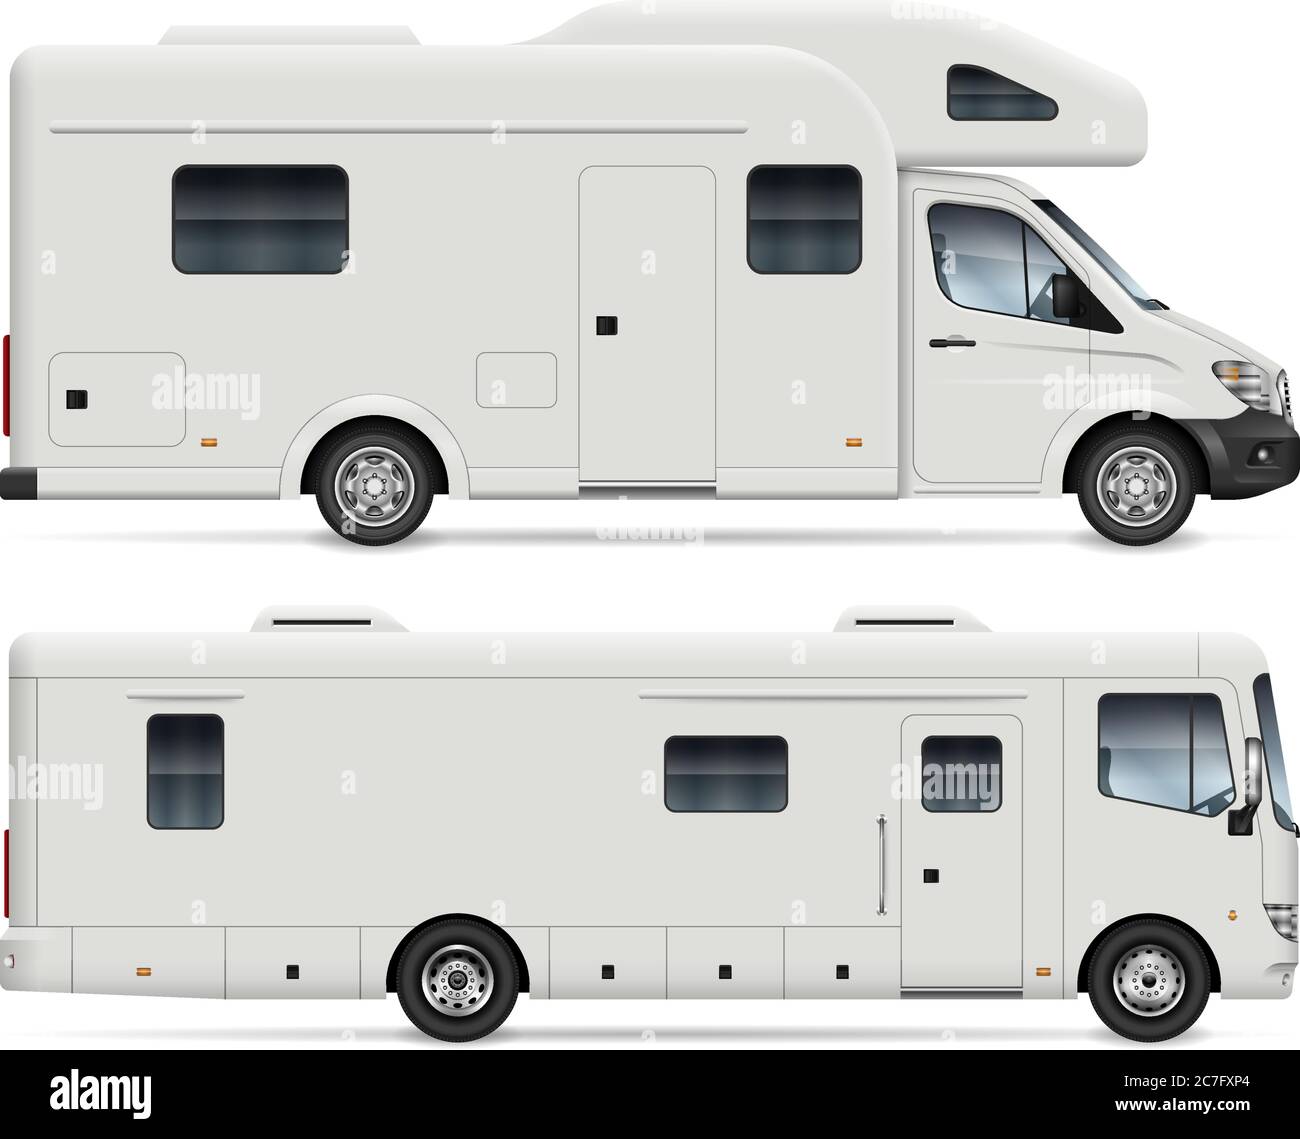 Motorhome side view vector mockup on white background for vehicle branding, corporate identity. All elements in the groups on separate layers Stock Vector